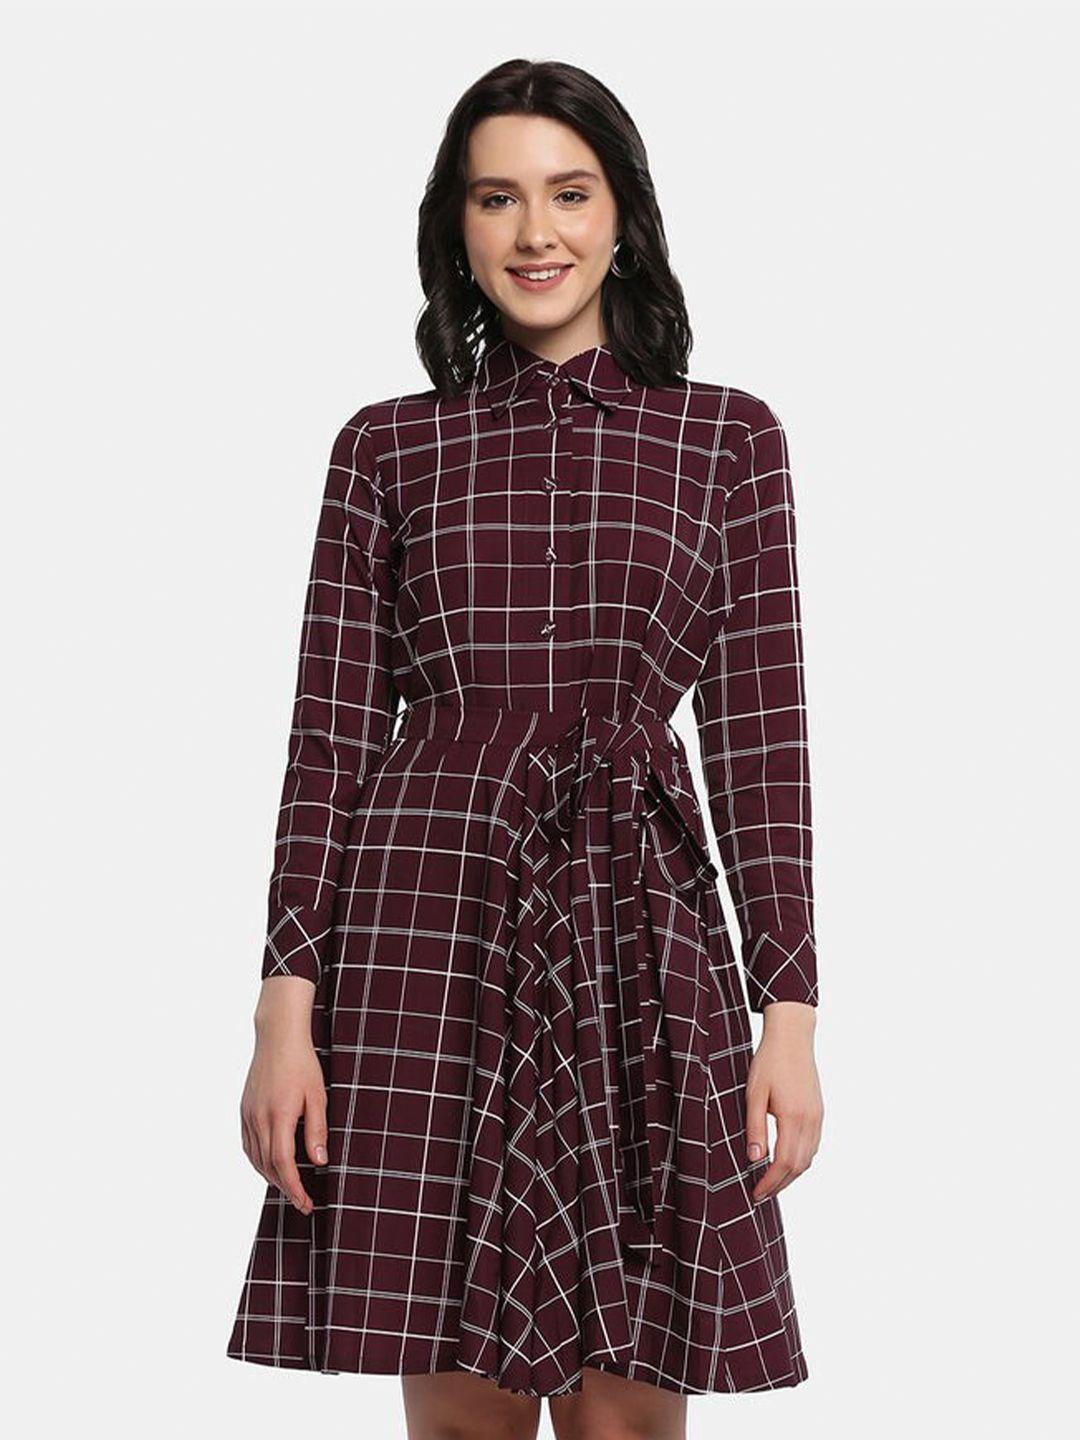 powersutra maroon checked crepe a-line dress